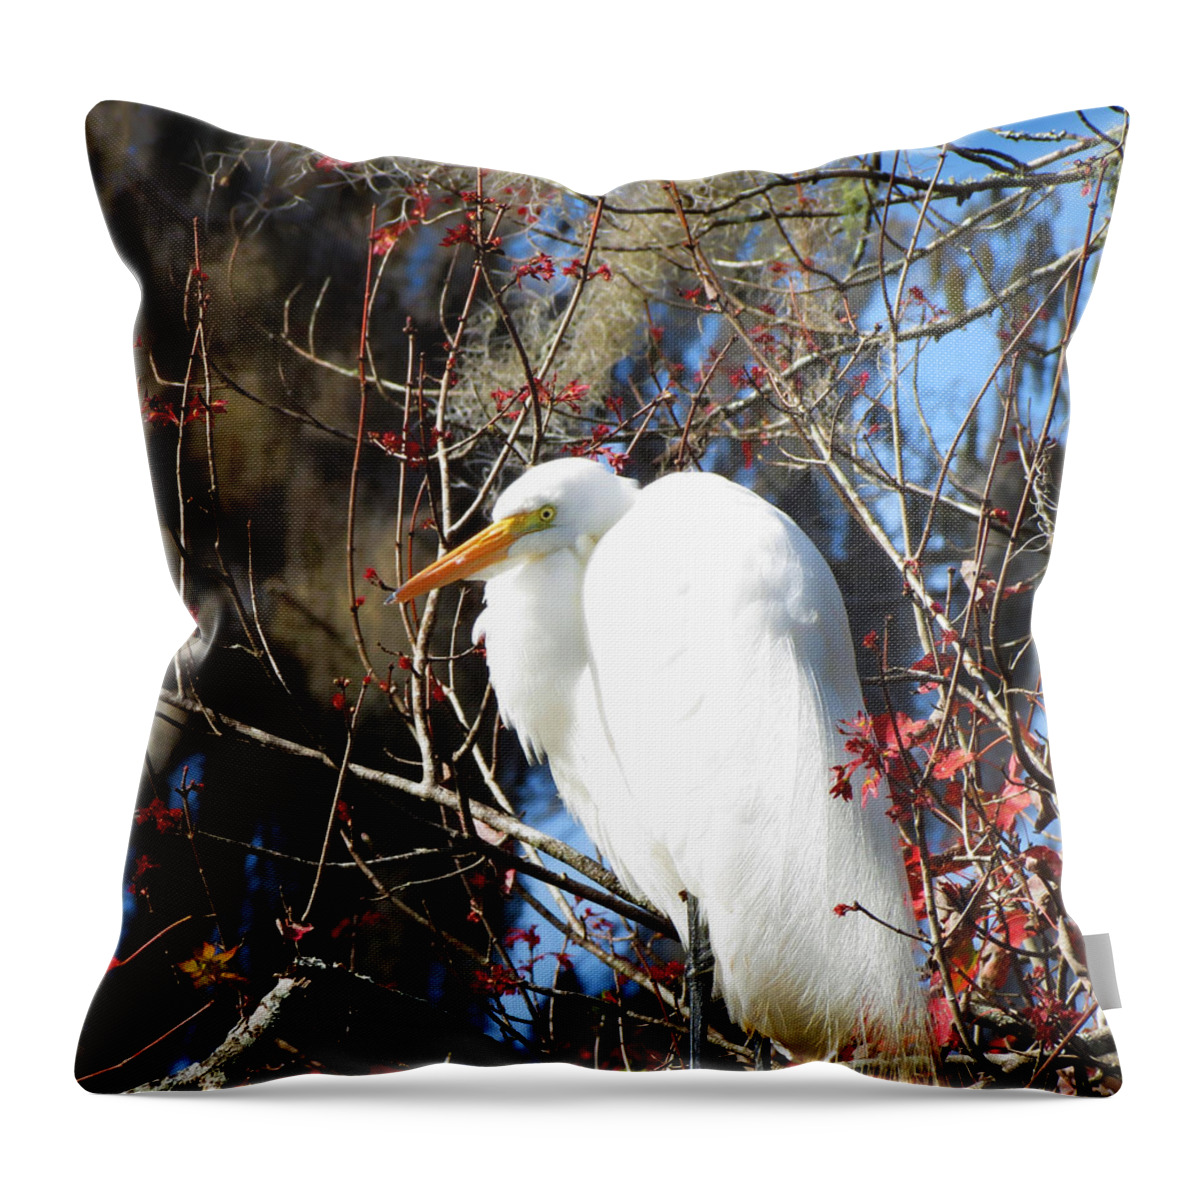 White Throw Pillow featuring the photograph White Egret Bird by Adrian De Leon Art and Photography